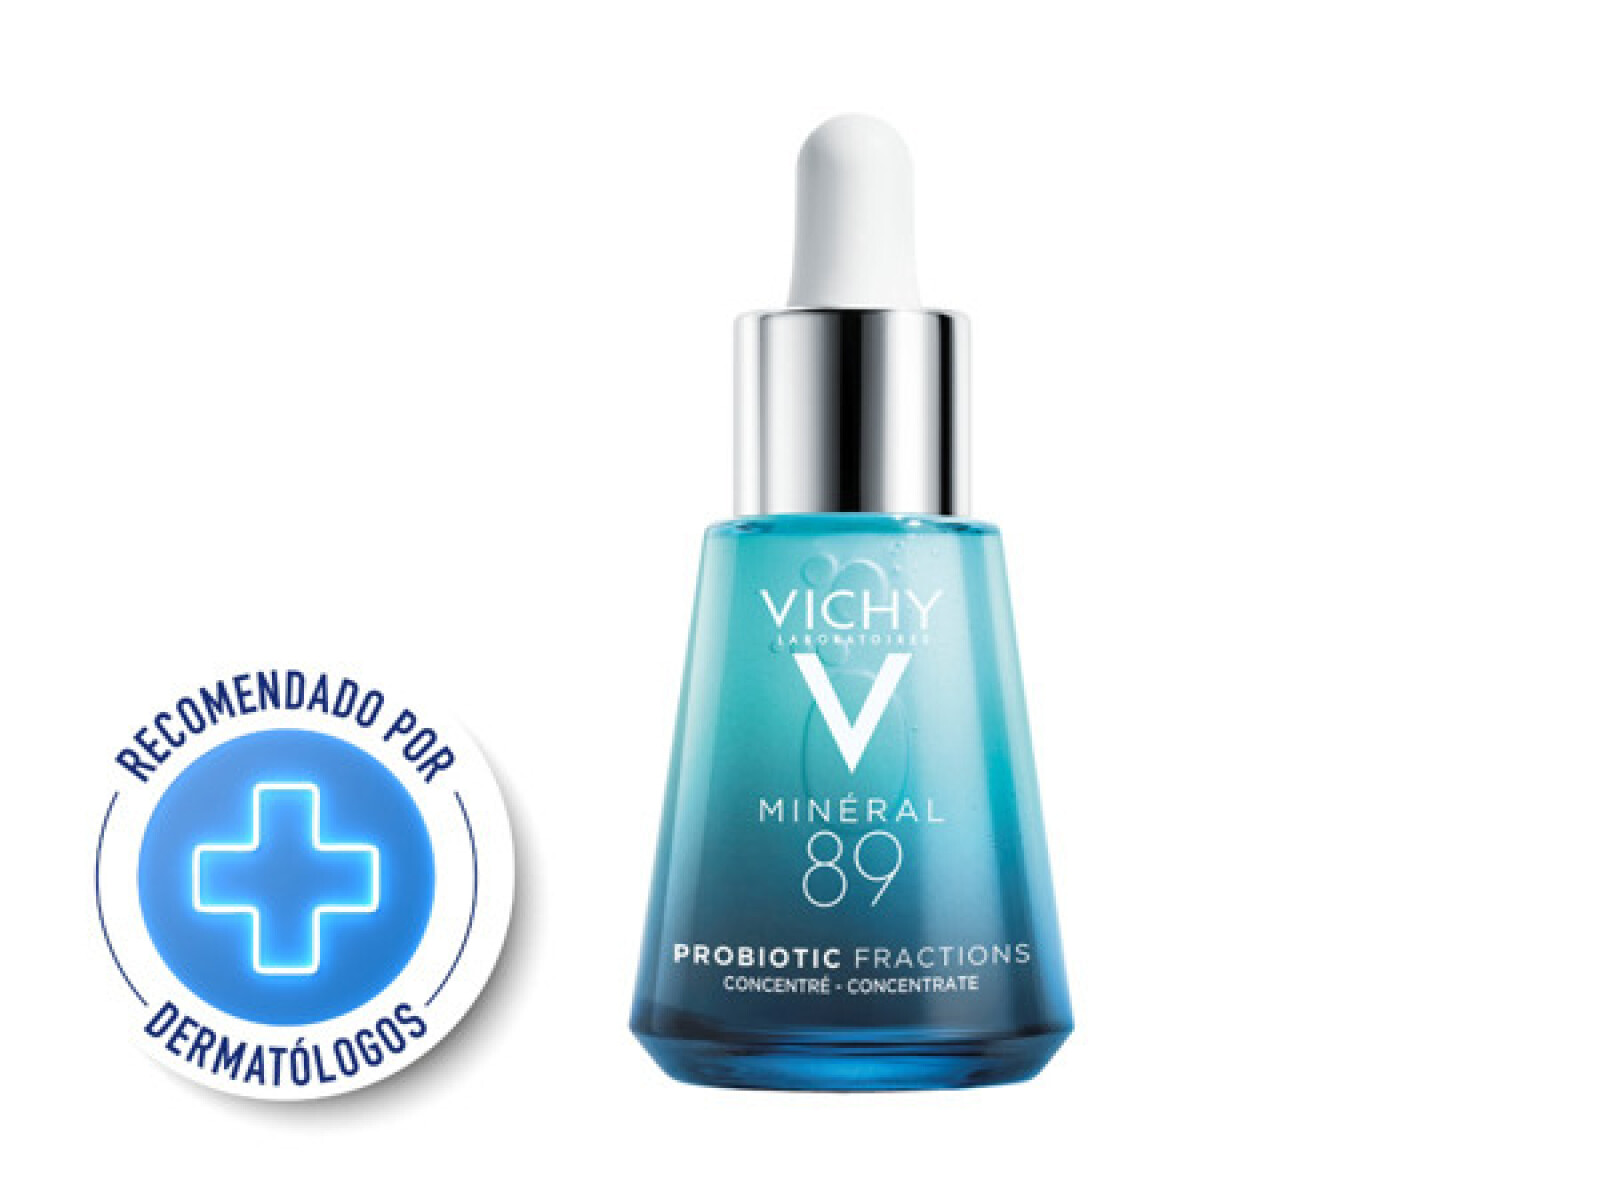 VICHY MINERAL 89 PROBIOTIC FRACTIONS 30 ml 